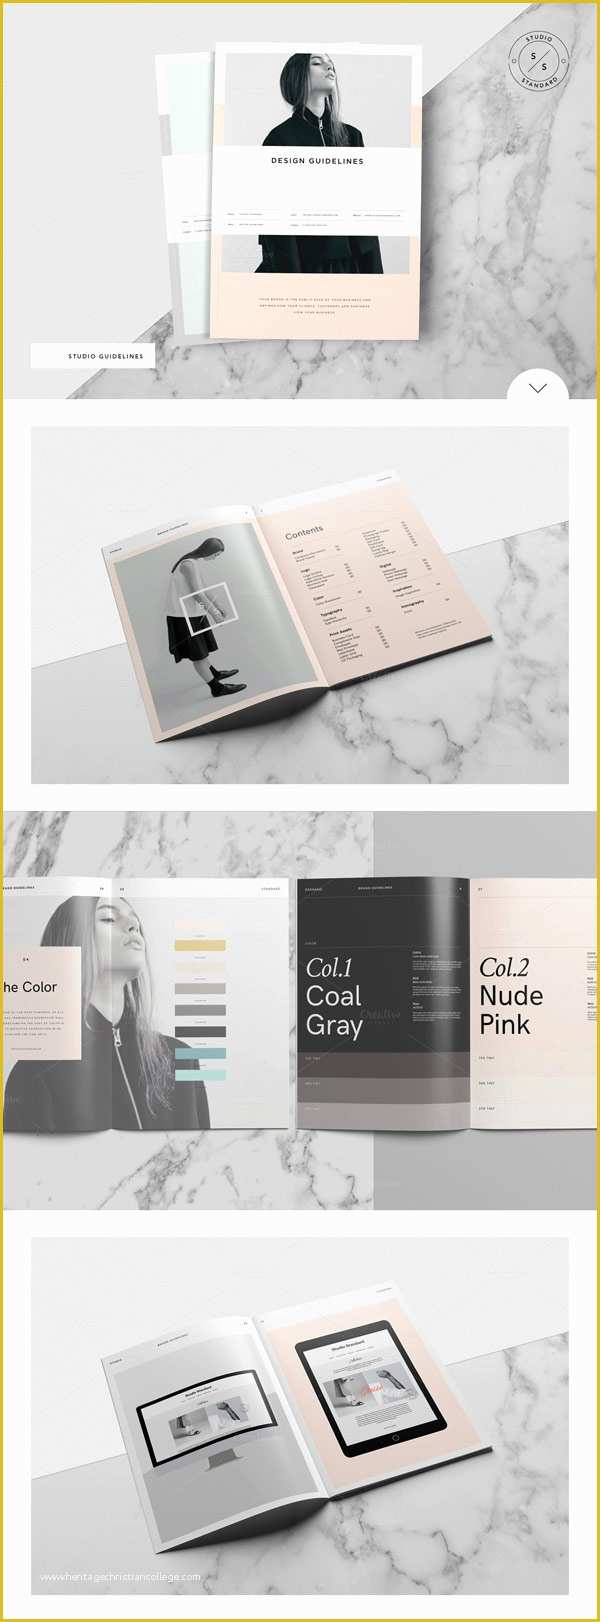 Brand Guidelines Template Indesign Free Of Studio Branding Guidelines Template for Adobe Indesign